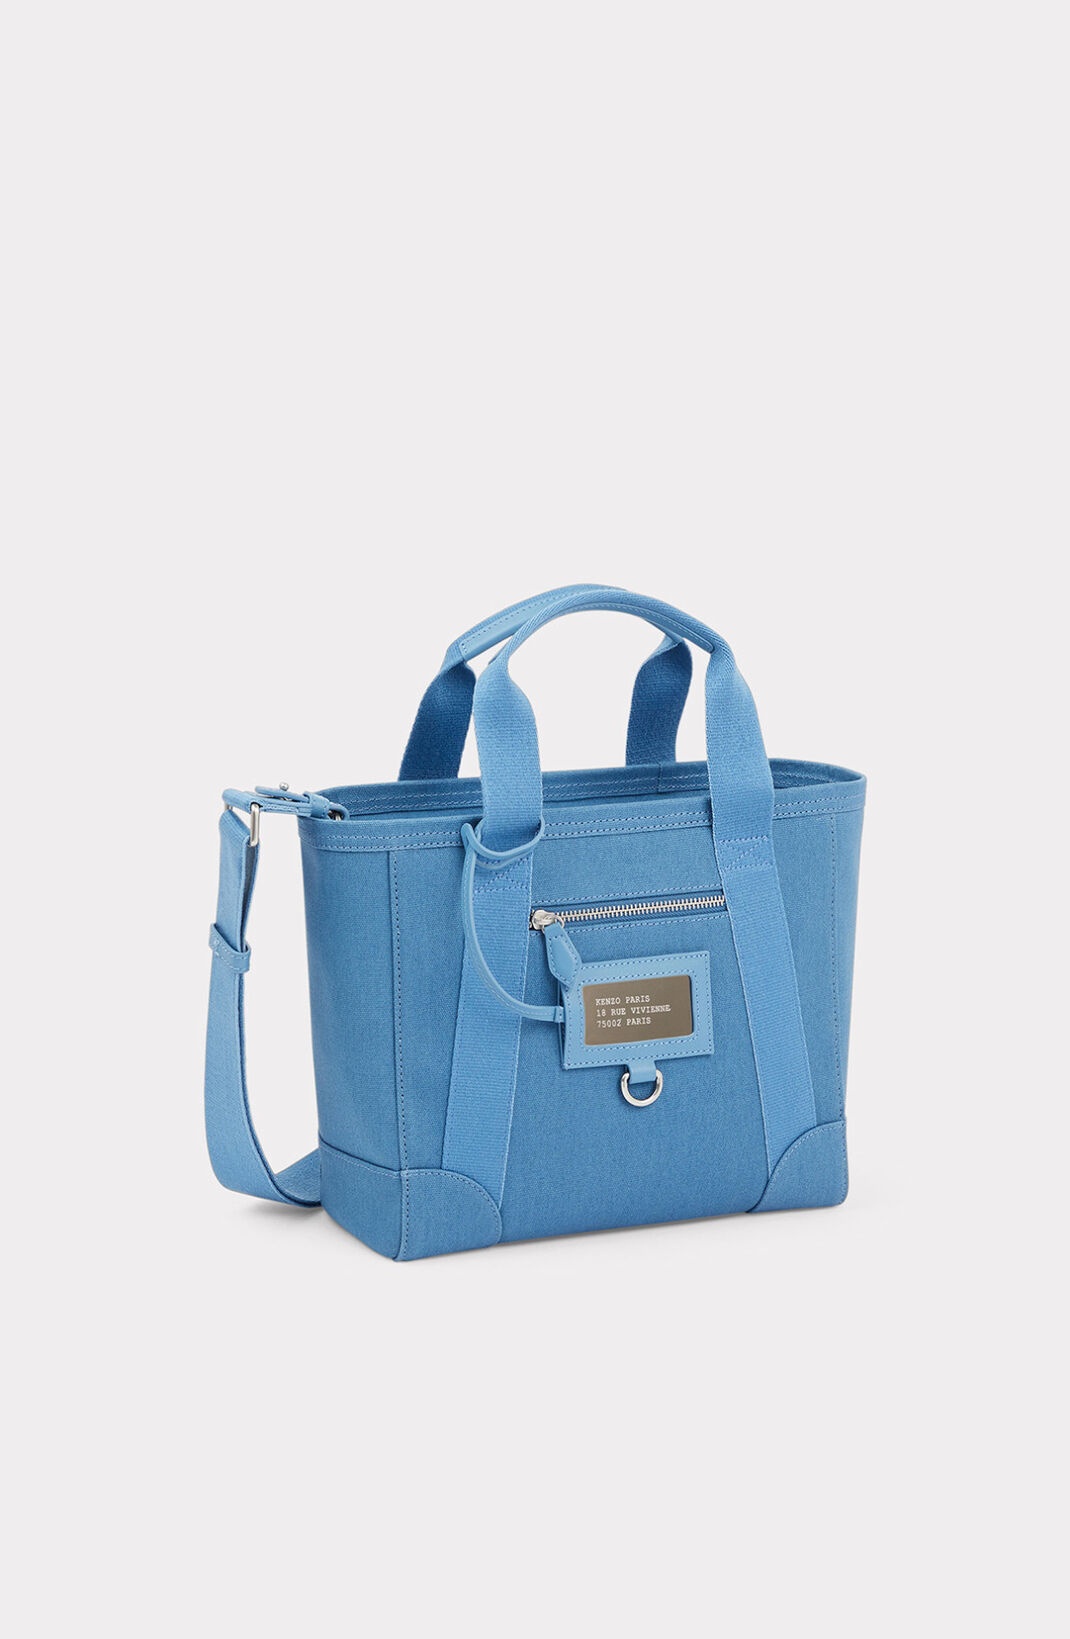 KENZO Paris small tote bag with crossbody strap - 2